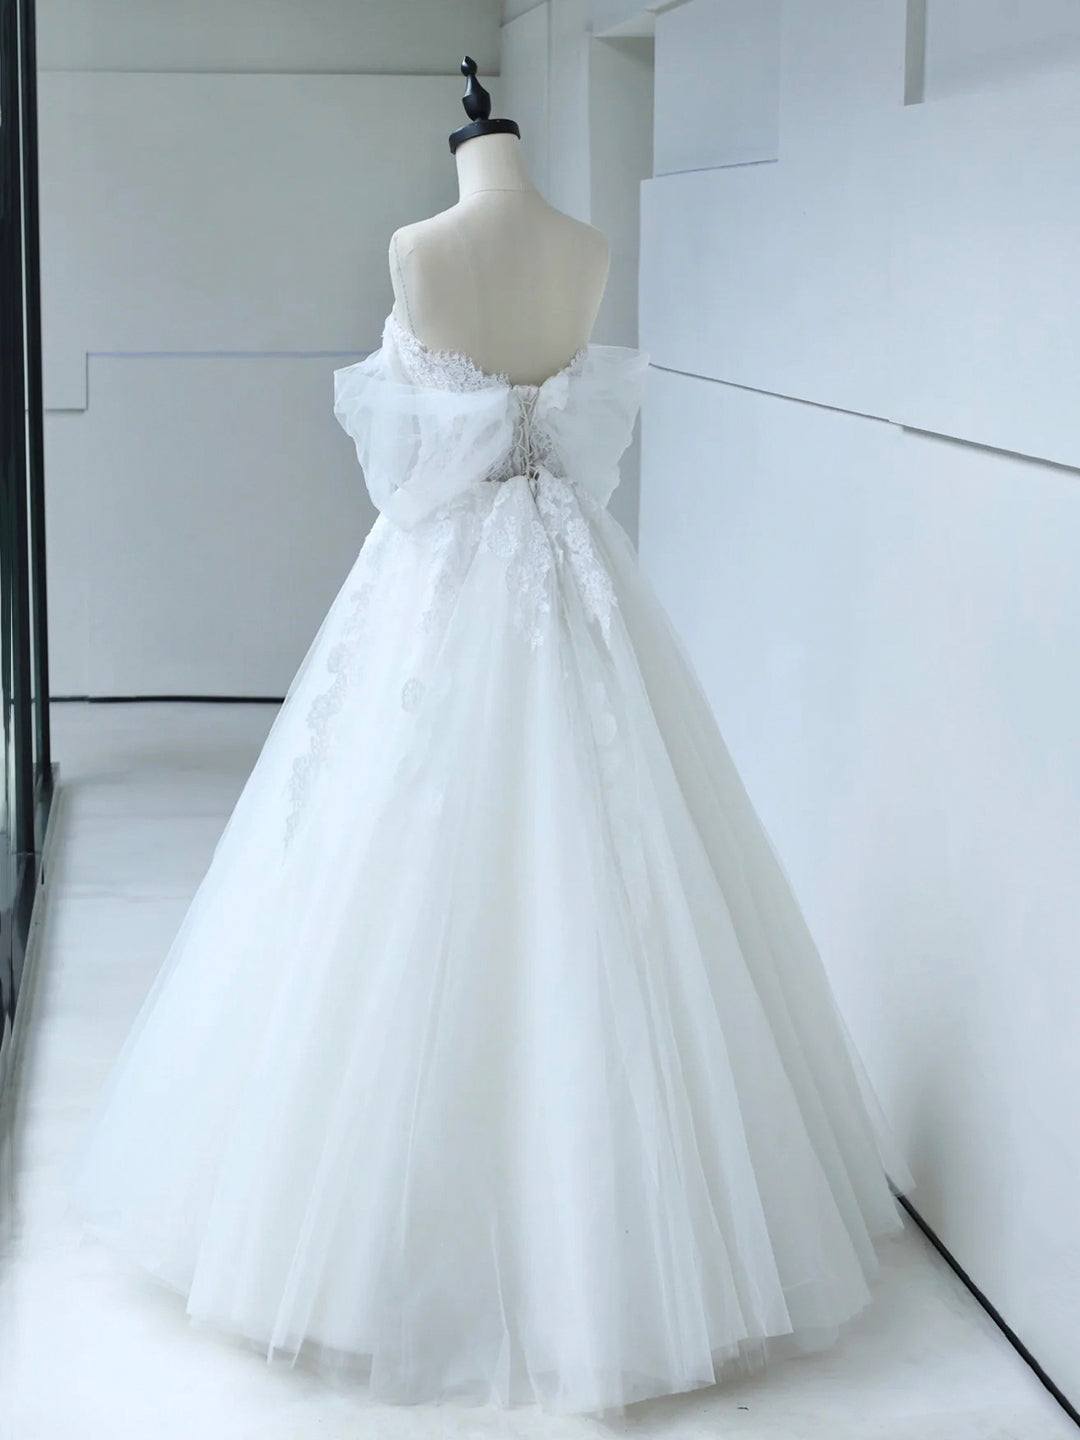 Formal Dress Shops, White Tulle Lace Long Prom Dress with Corset, Off the Shoulder Sweetheart Evening Dress